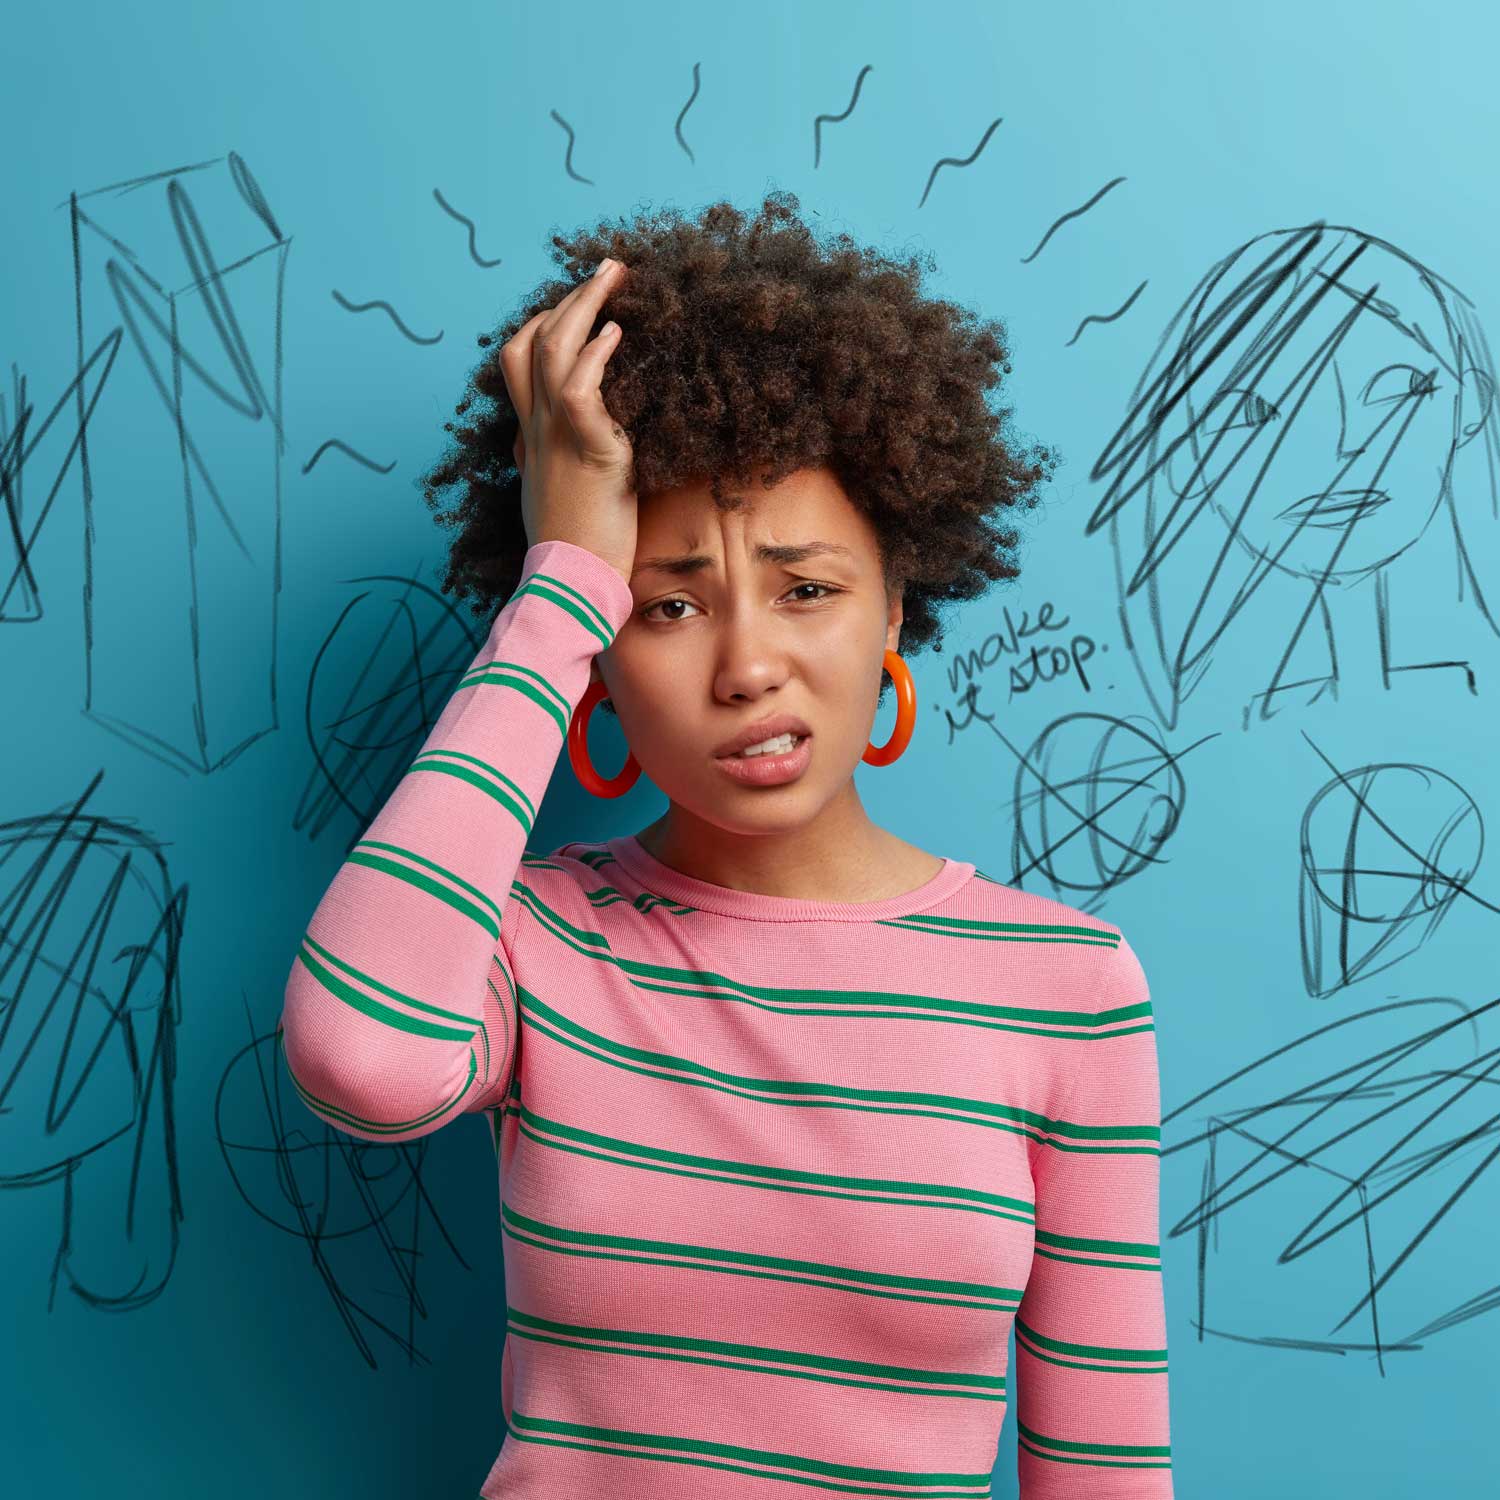 woman artists frustrated because she can't draw like she would would like to